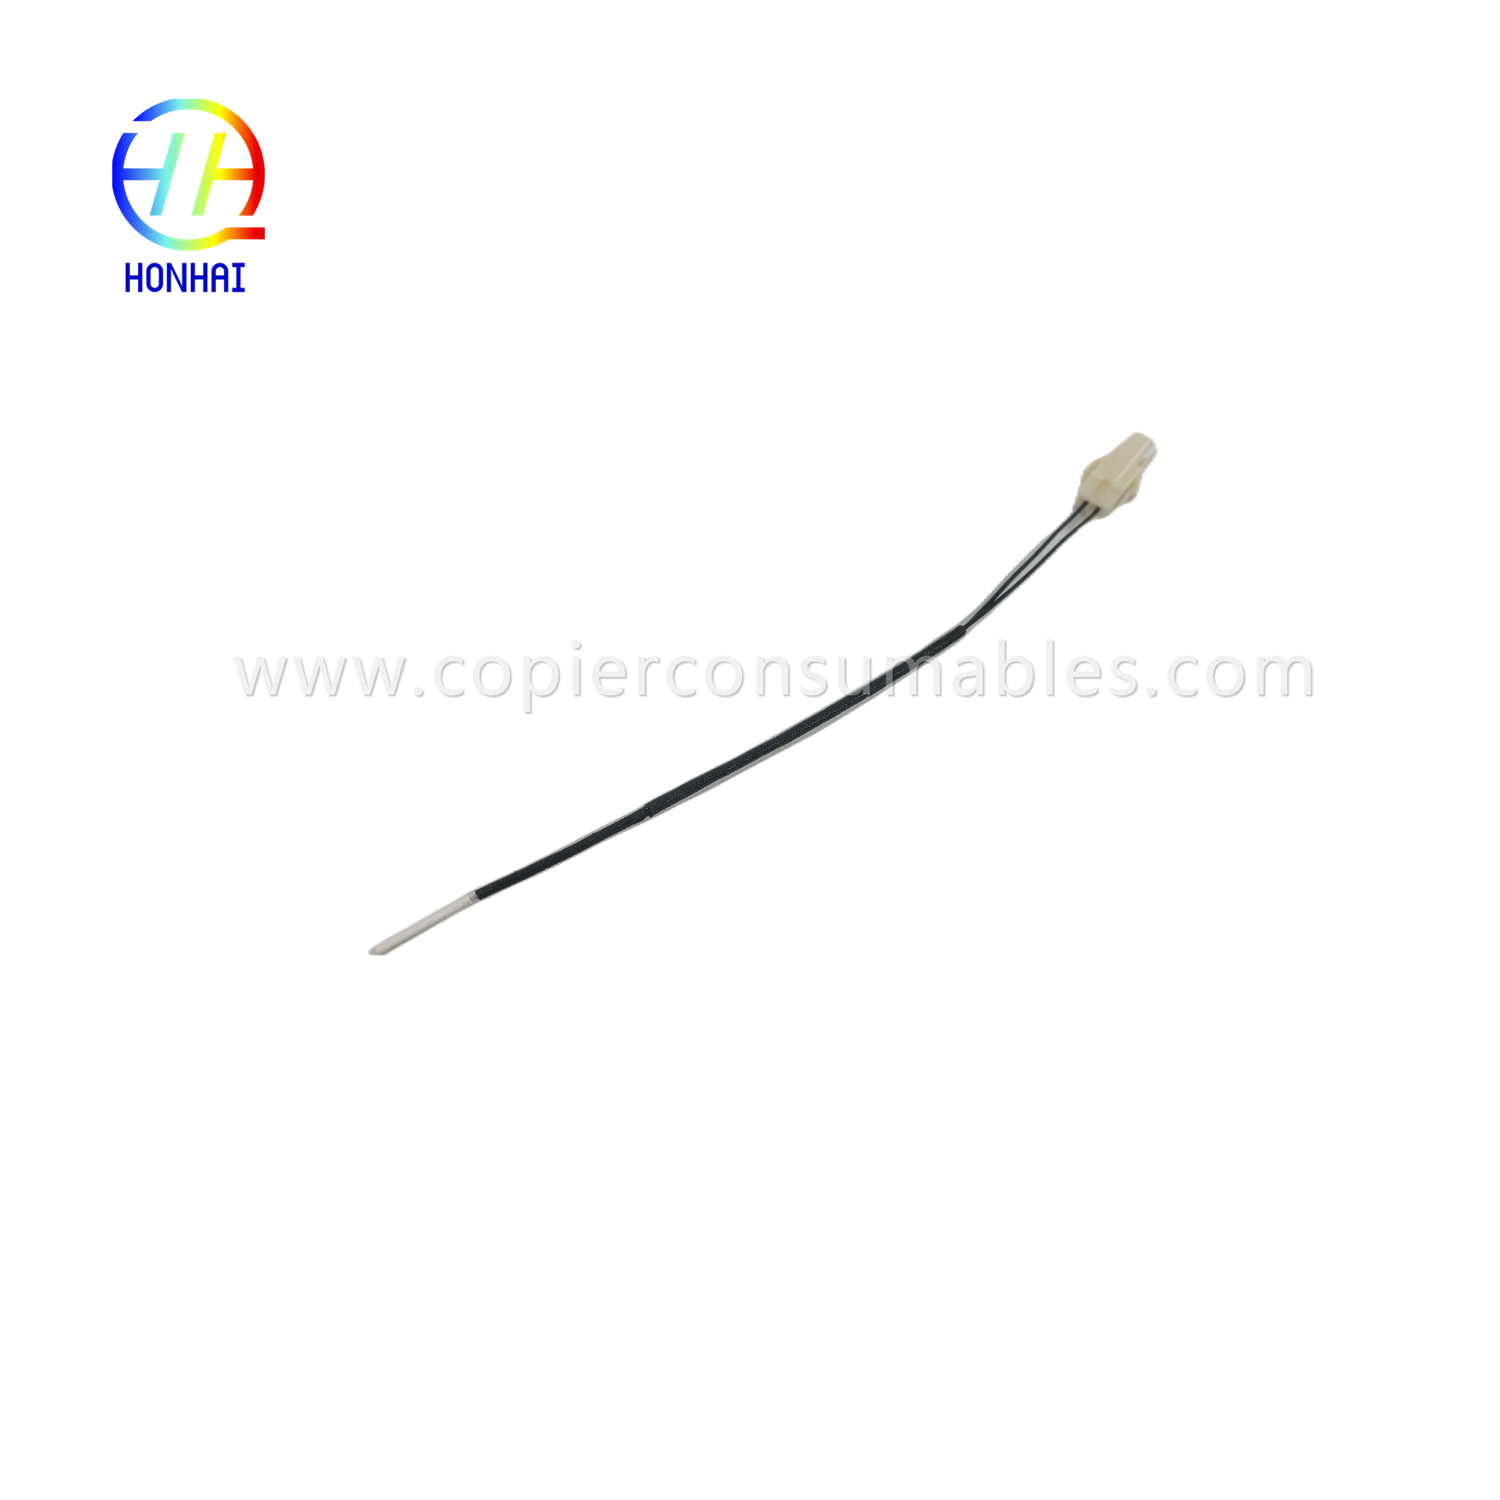 Fuser Thermistor mo OCE Pw300 340 350 360 365 TDS100 320 400 450 500 7050 9300 9400 (2)